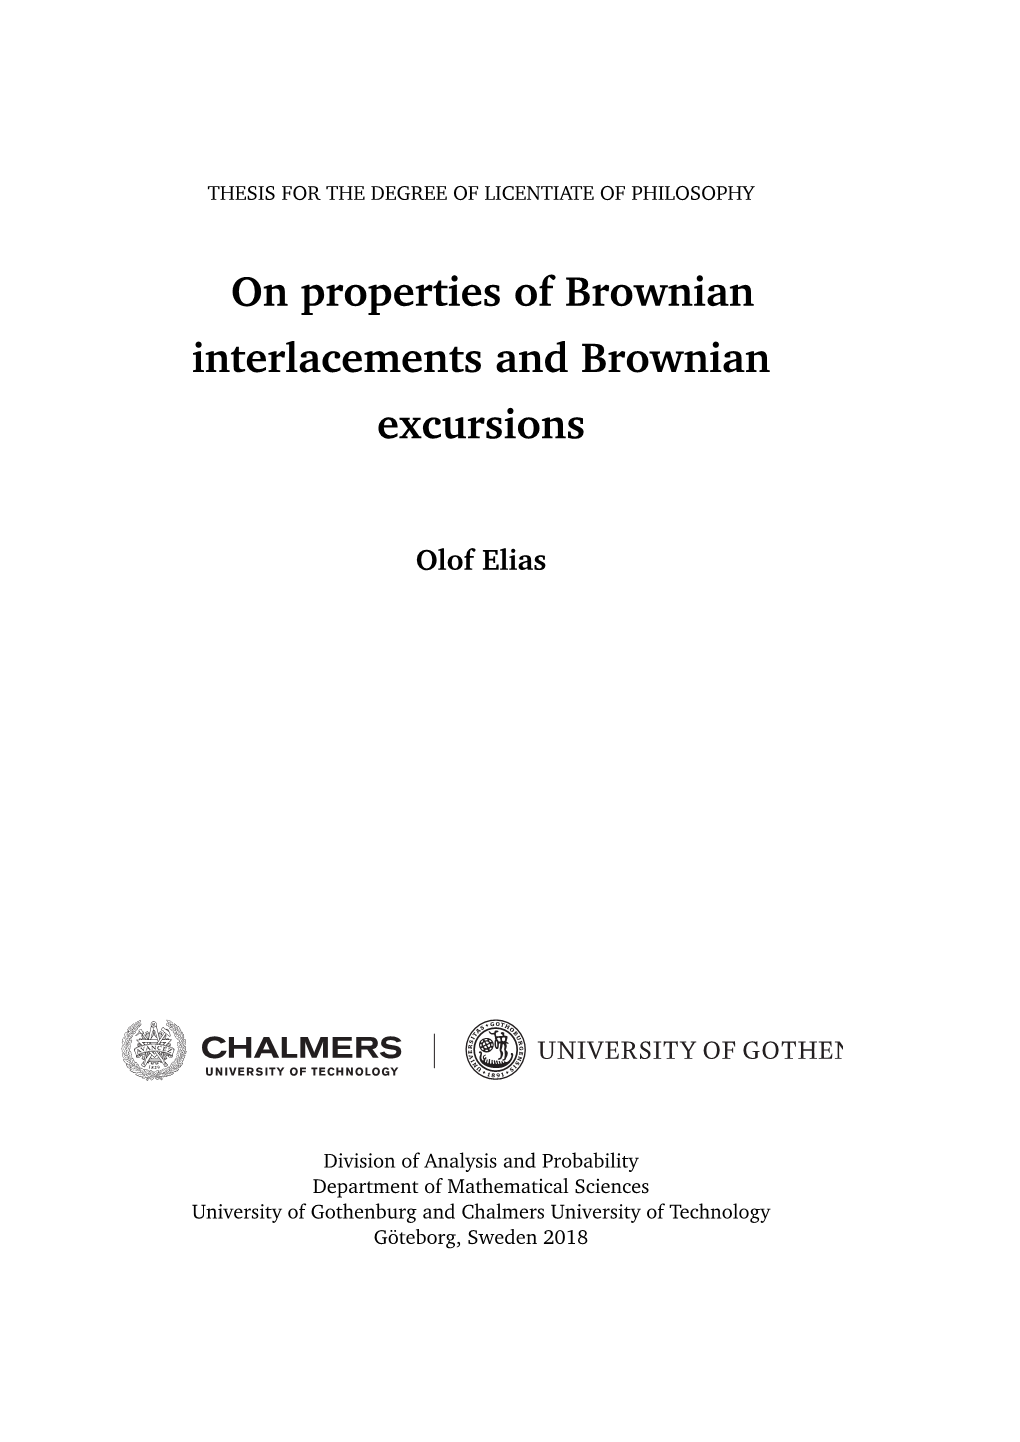 On Properties of Brownian Interlacements and Brownian Excursions